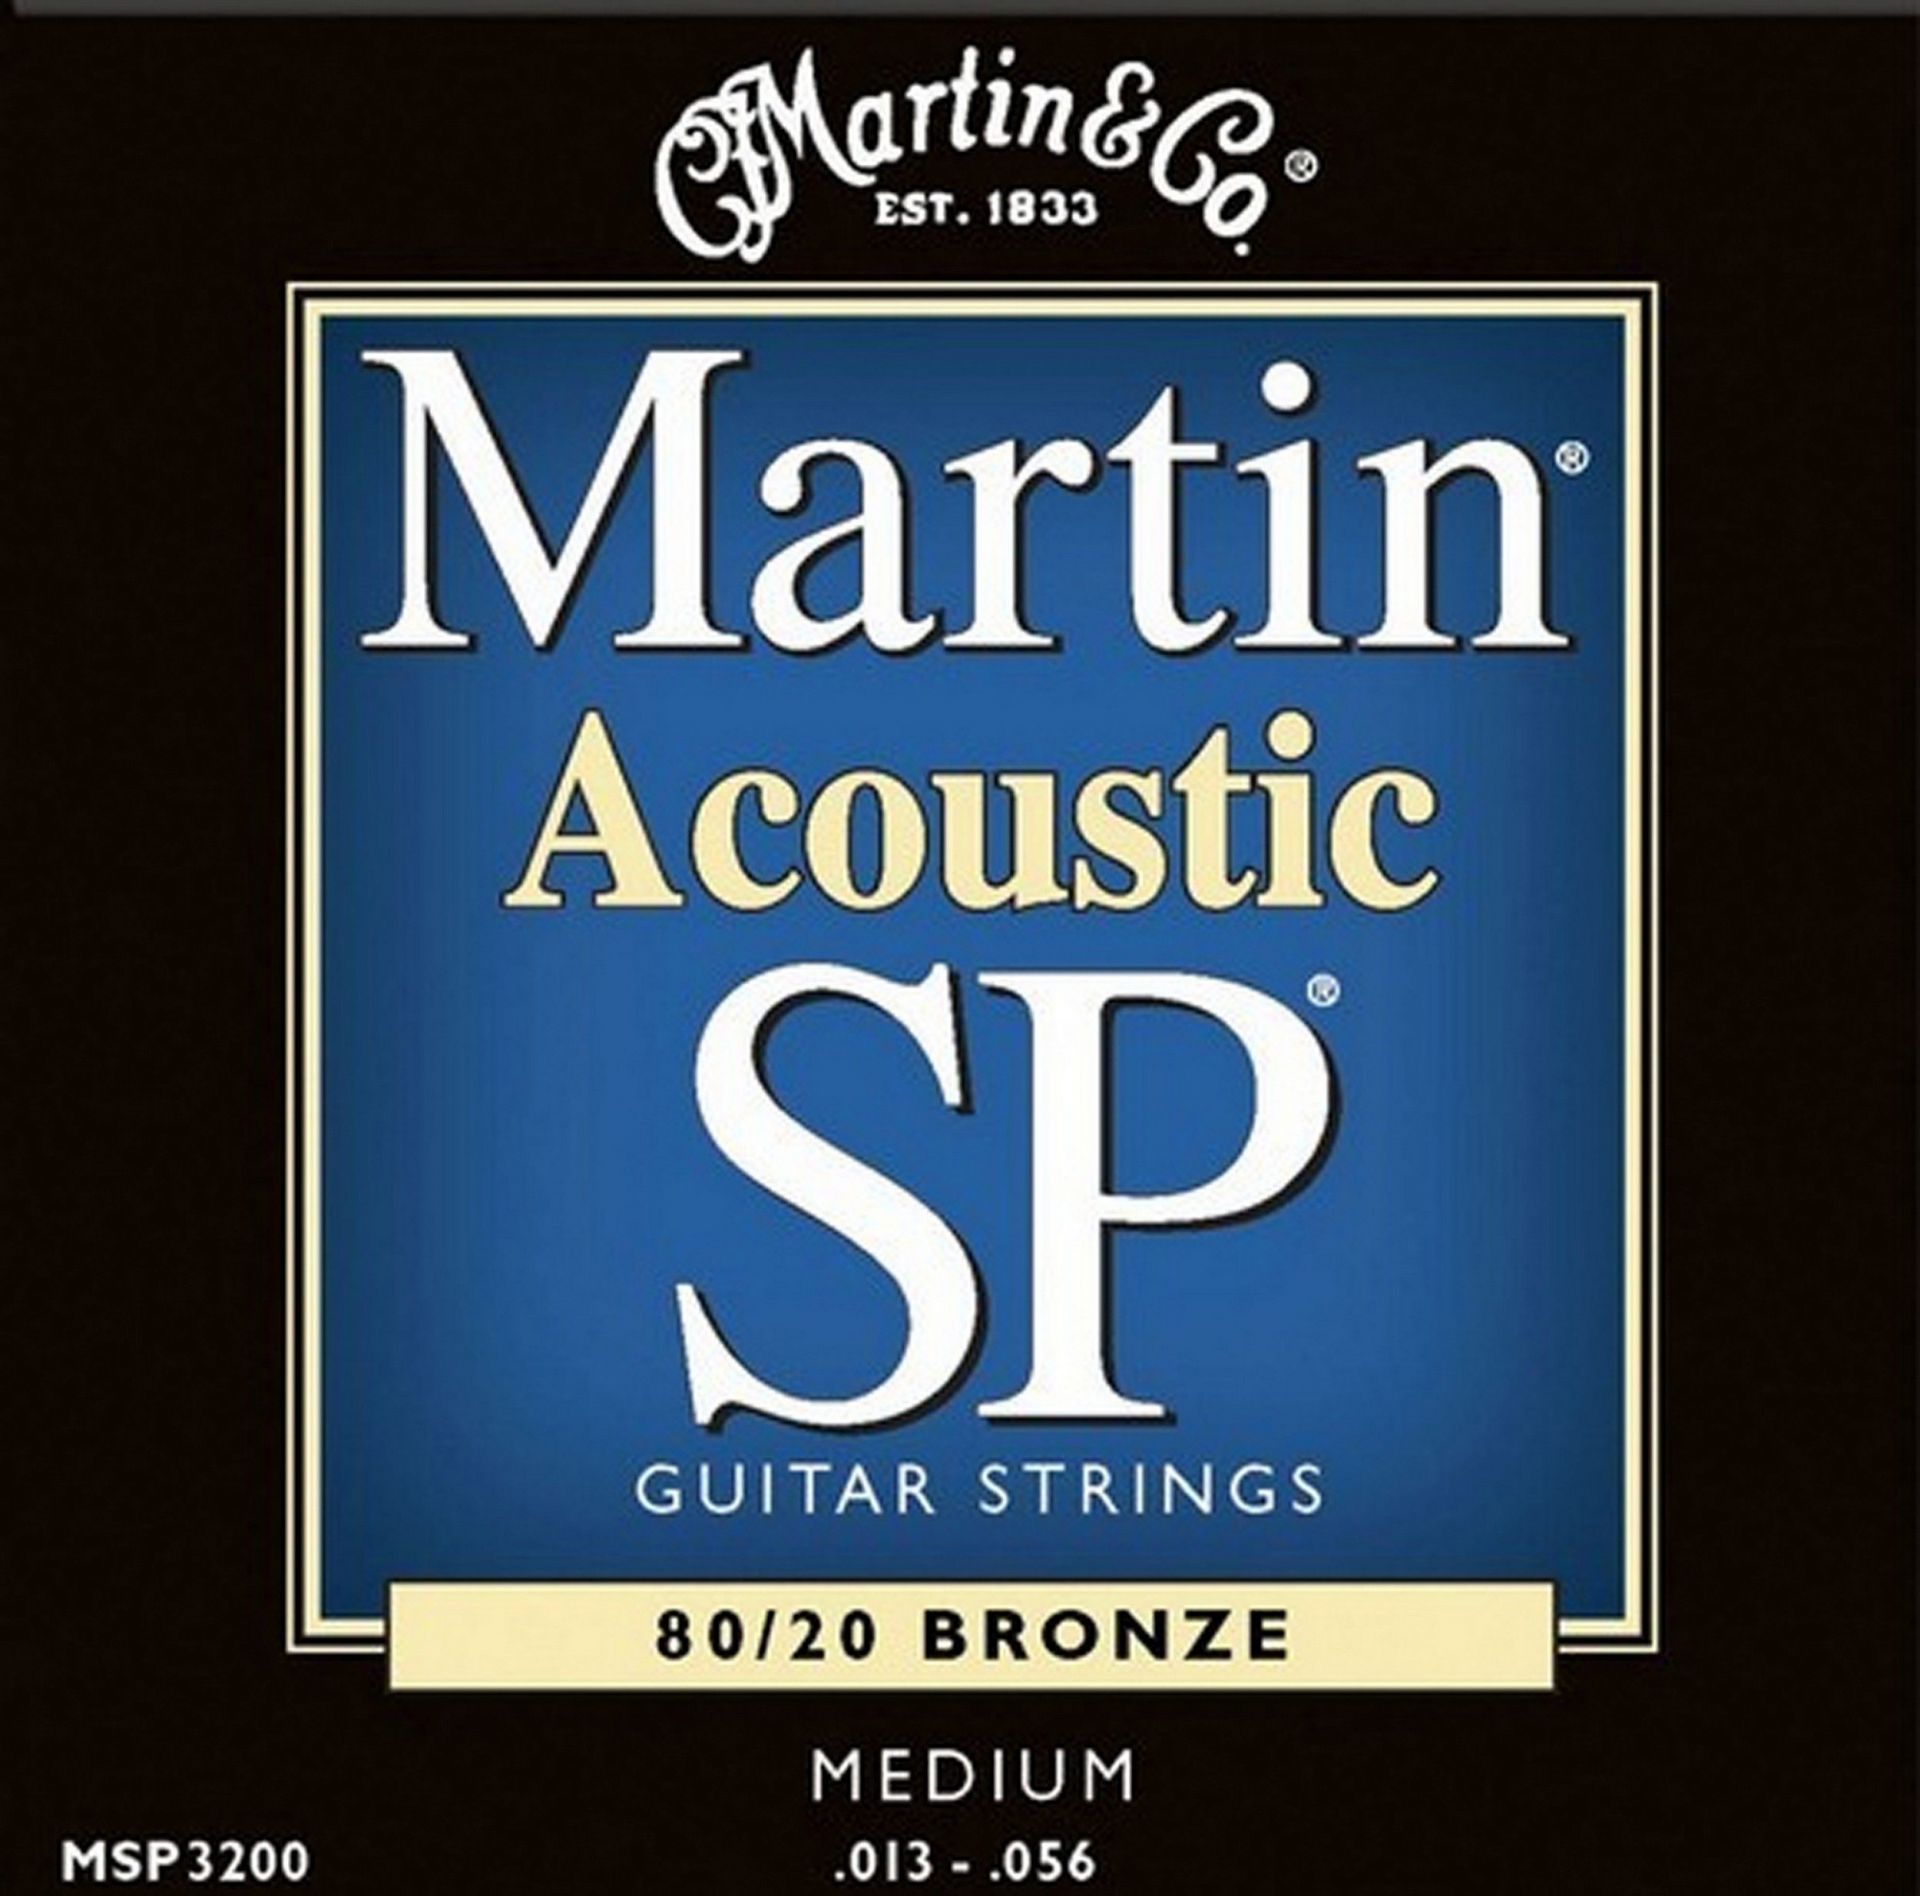 Martin and Co MSP 3200